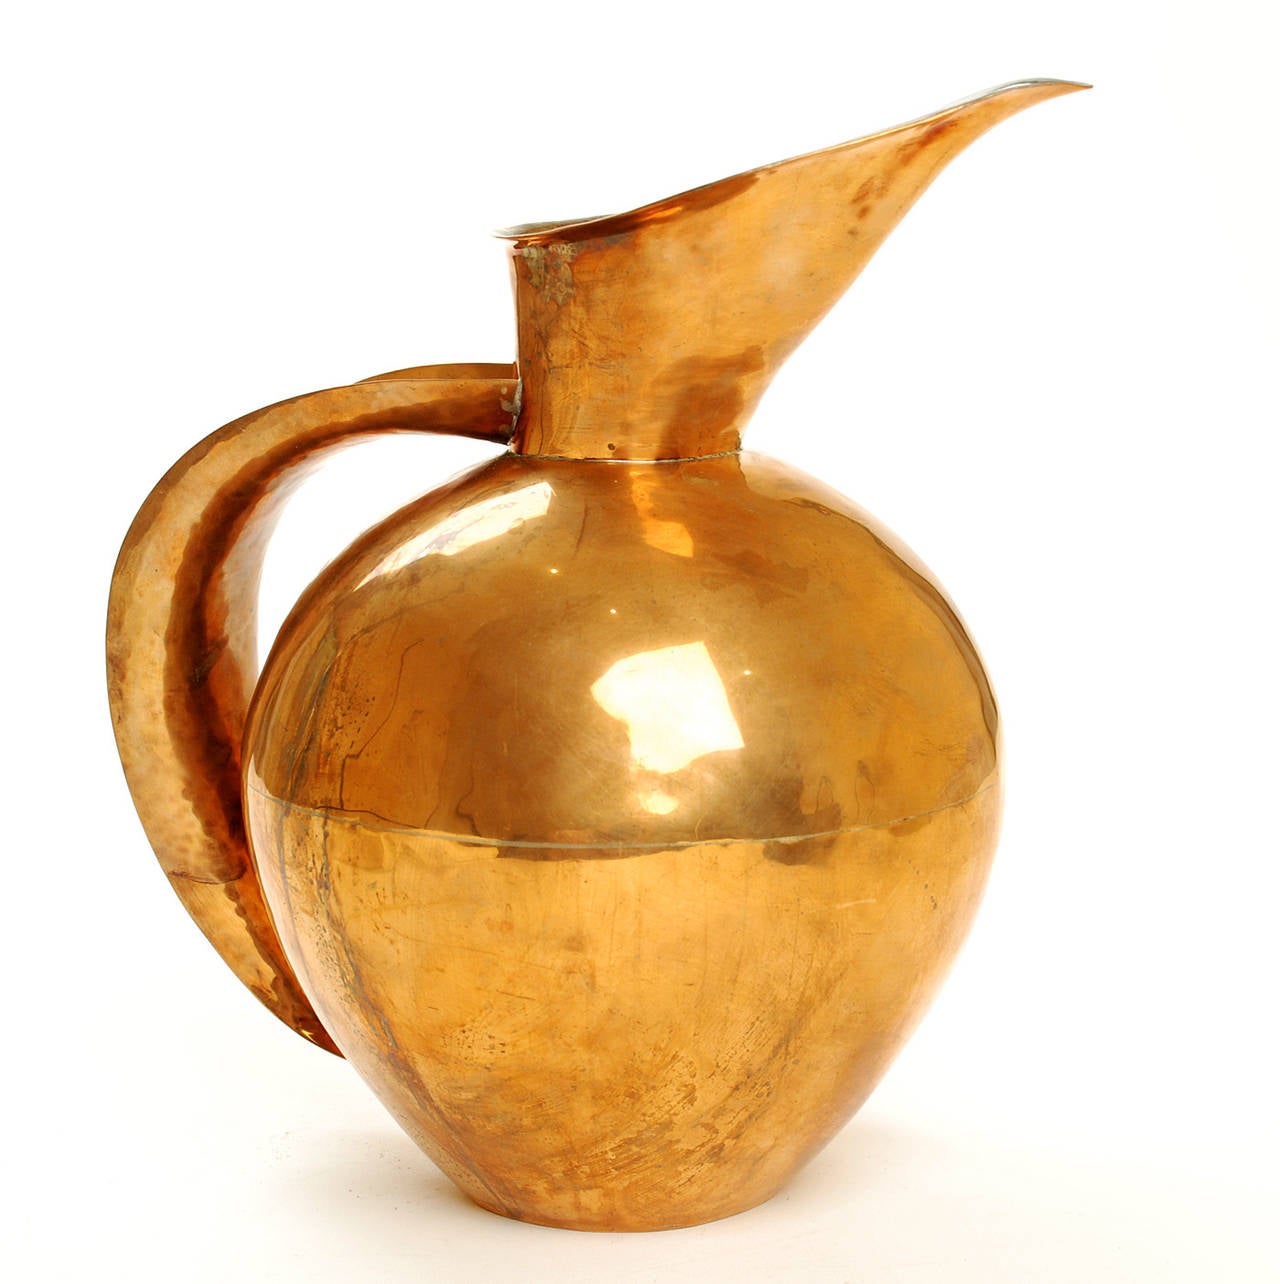 A fine and rare Mid-Century Modernist copper pitcher by Antonio Pineda. The hand-wrought ovoid body is surmounted by a circular neck, with a tapering 